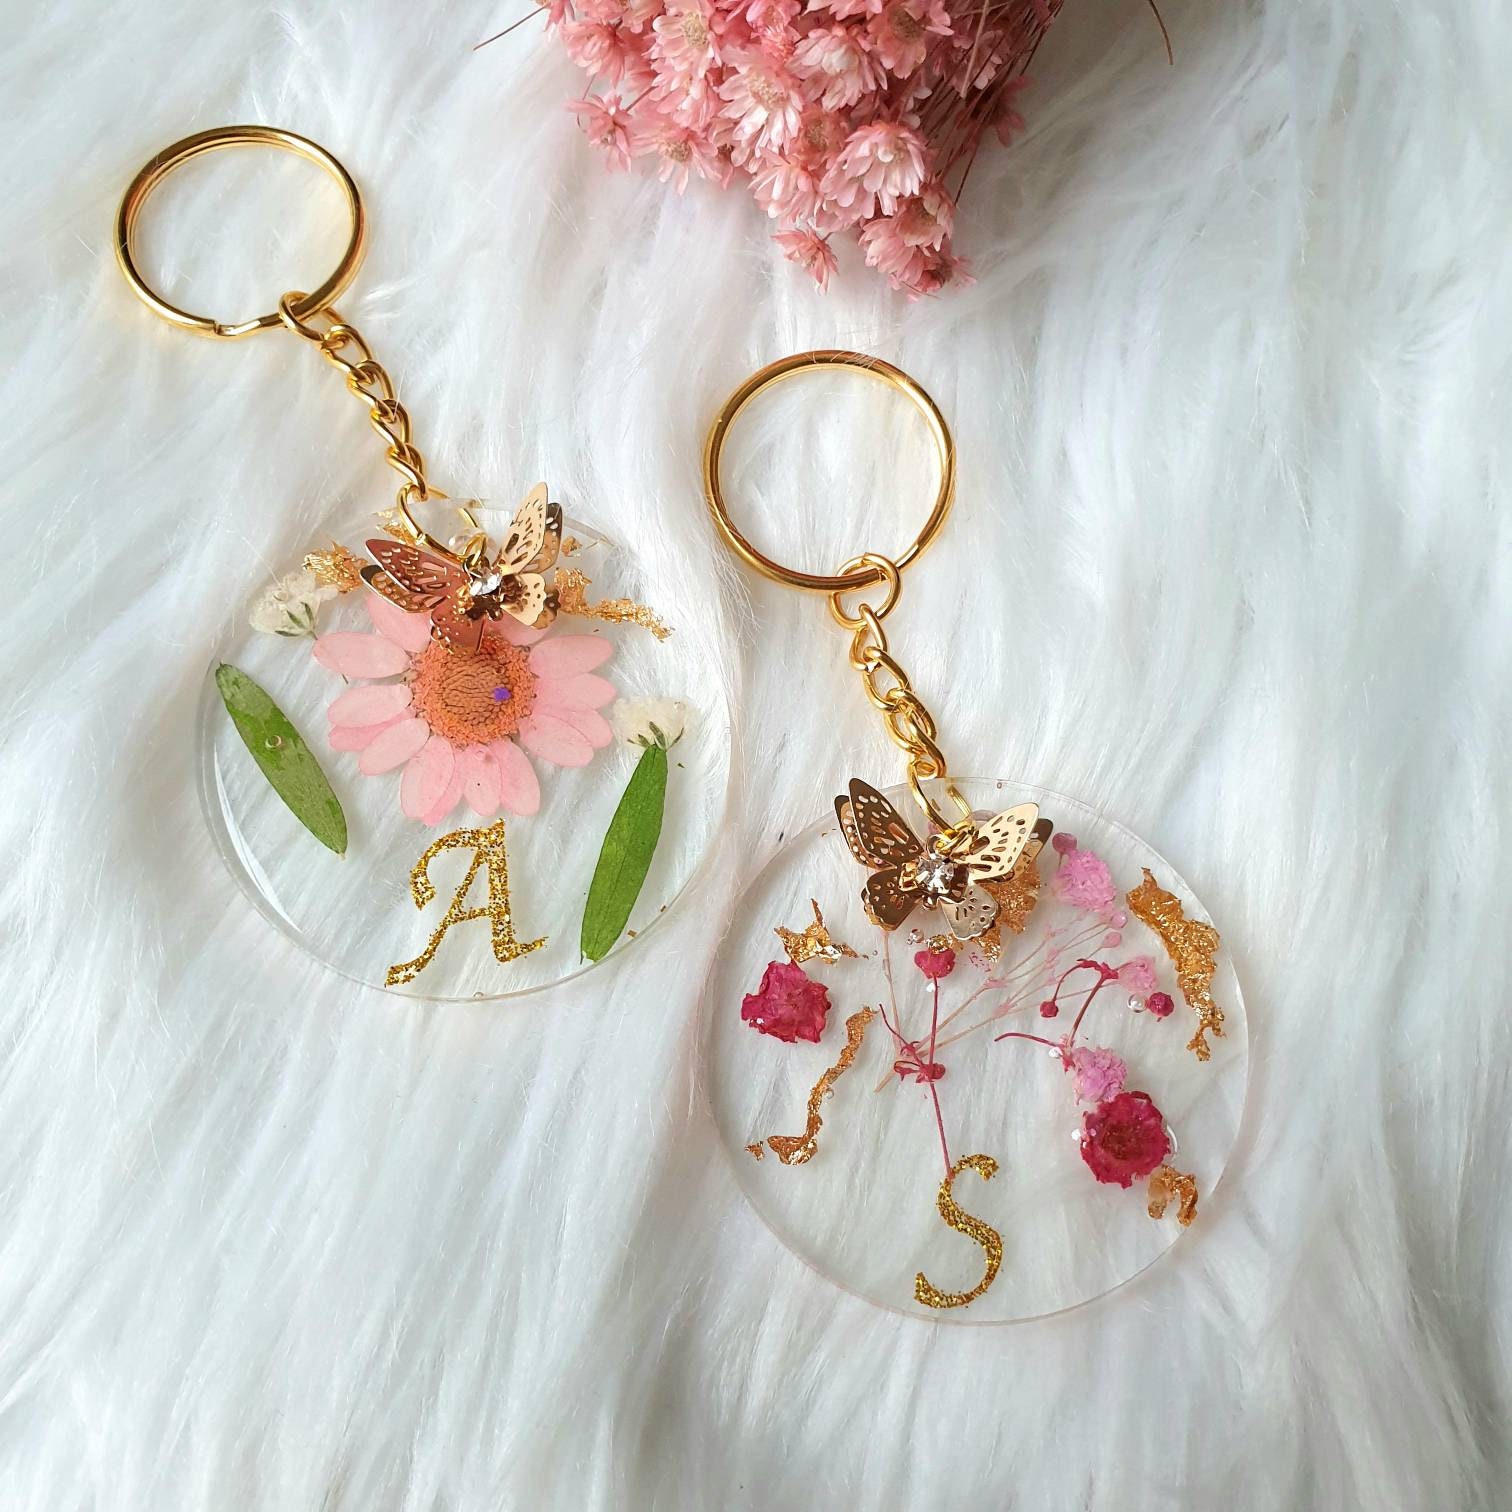 Resin Keychain, Round Shape, With Glittering Letters, Real Pink